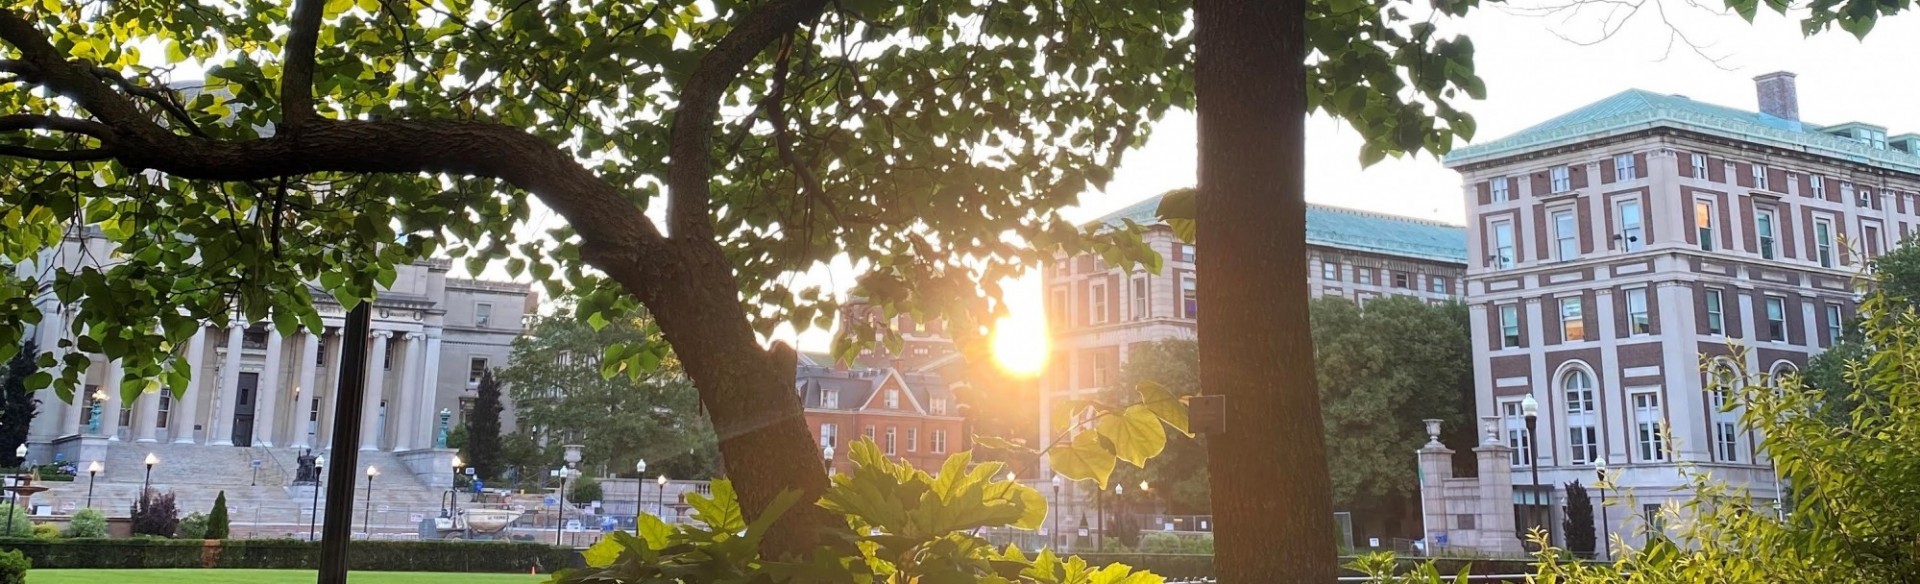 Sunset visible beyond leafy trees and beyond buildings.